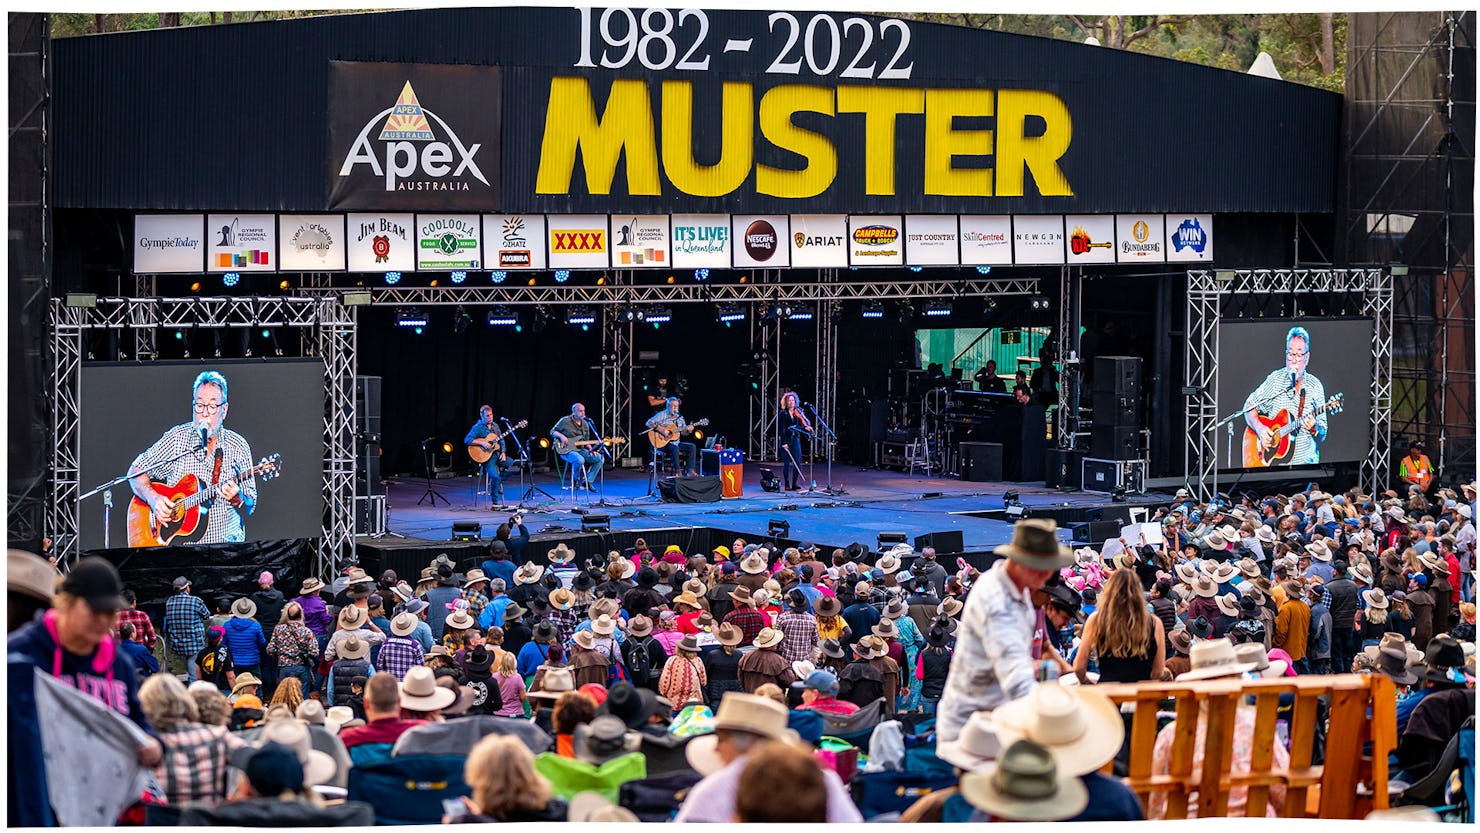 The Gympie Music Muster